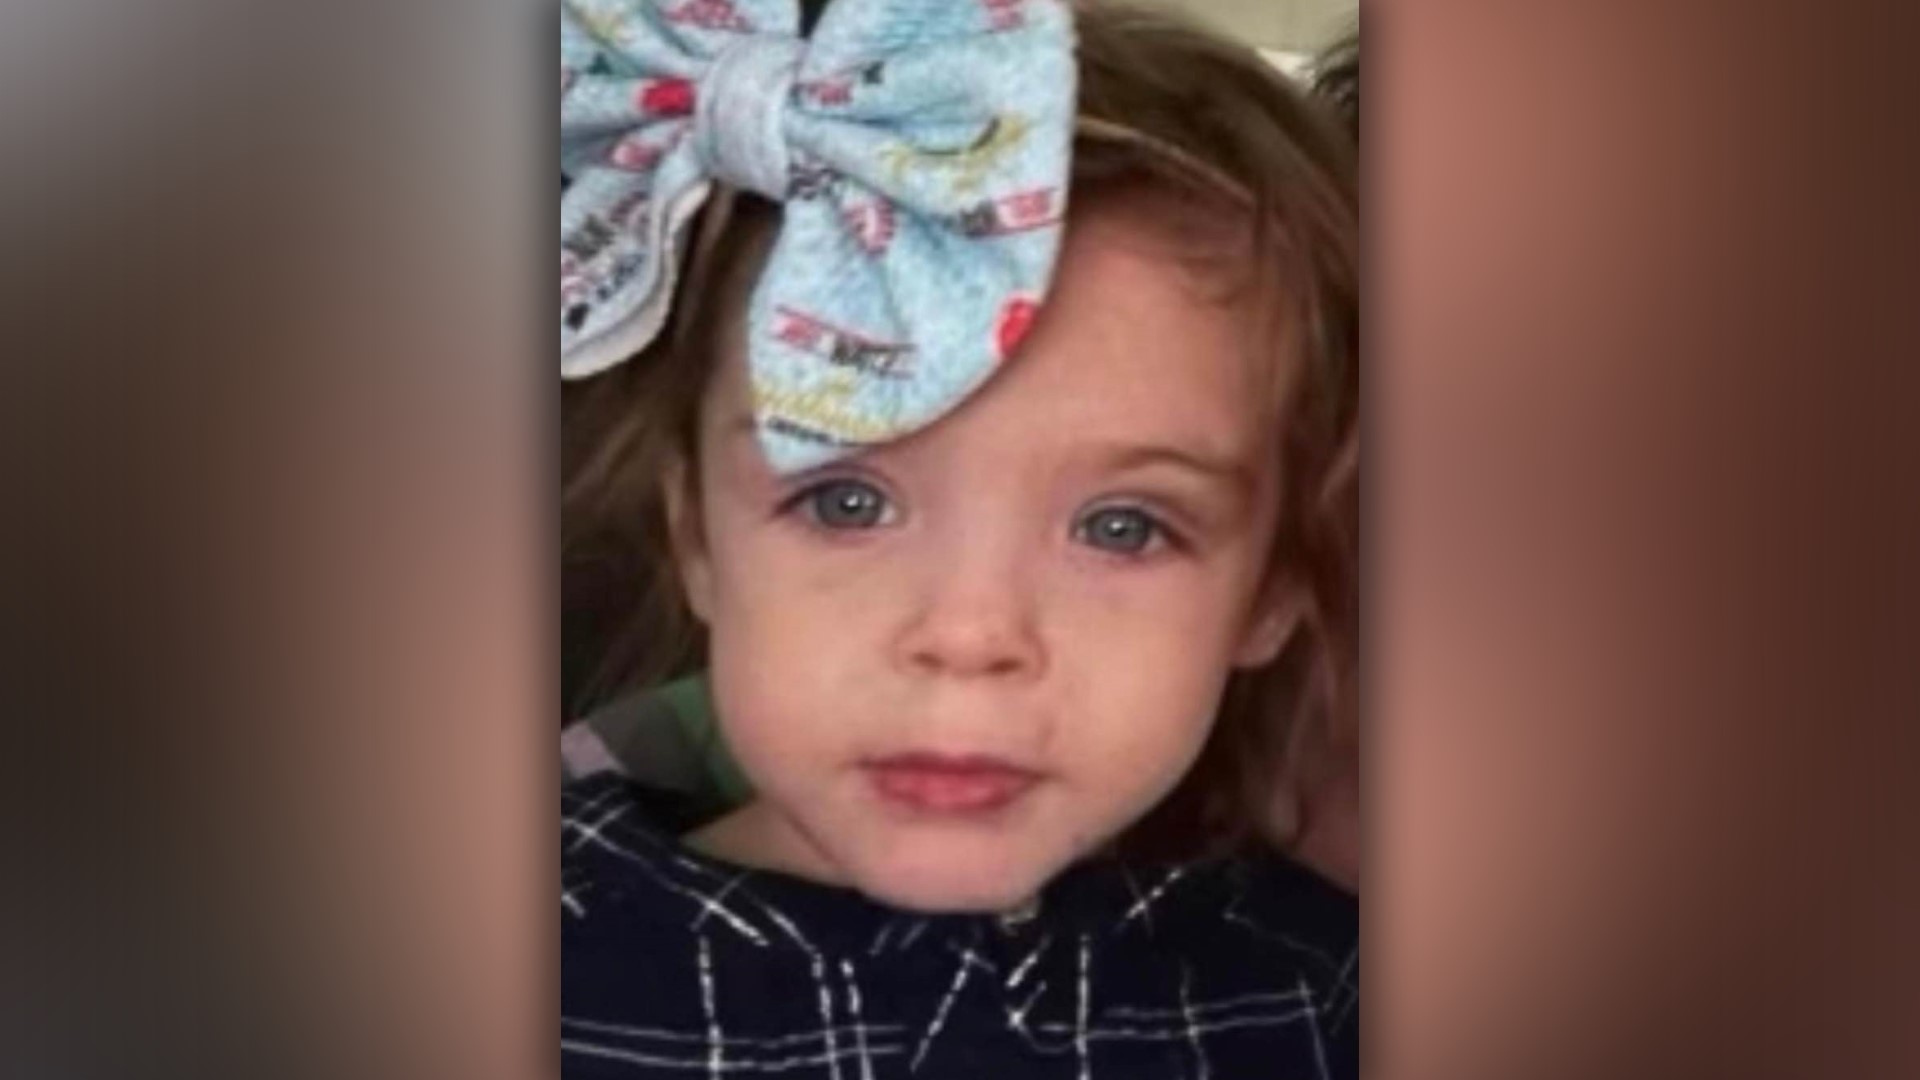 The Oklahoma Chief Medical Examiner has positively identified the remains found during the search for the missing girl.